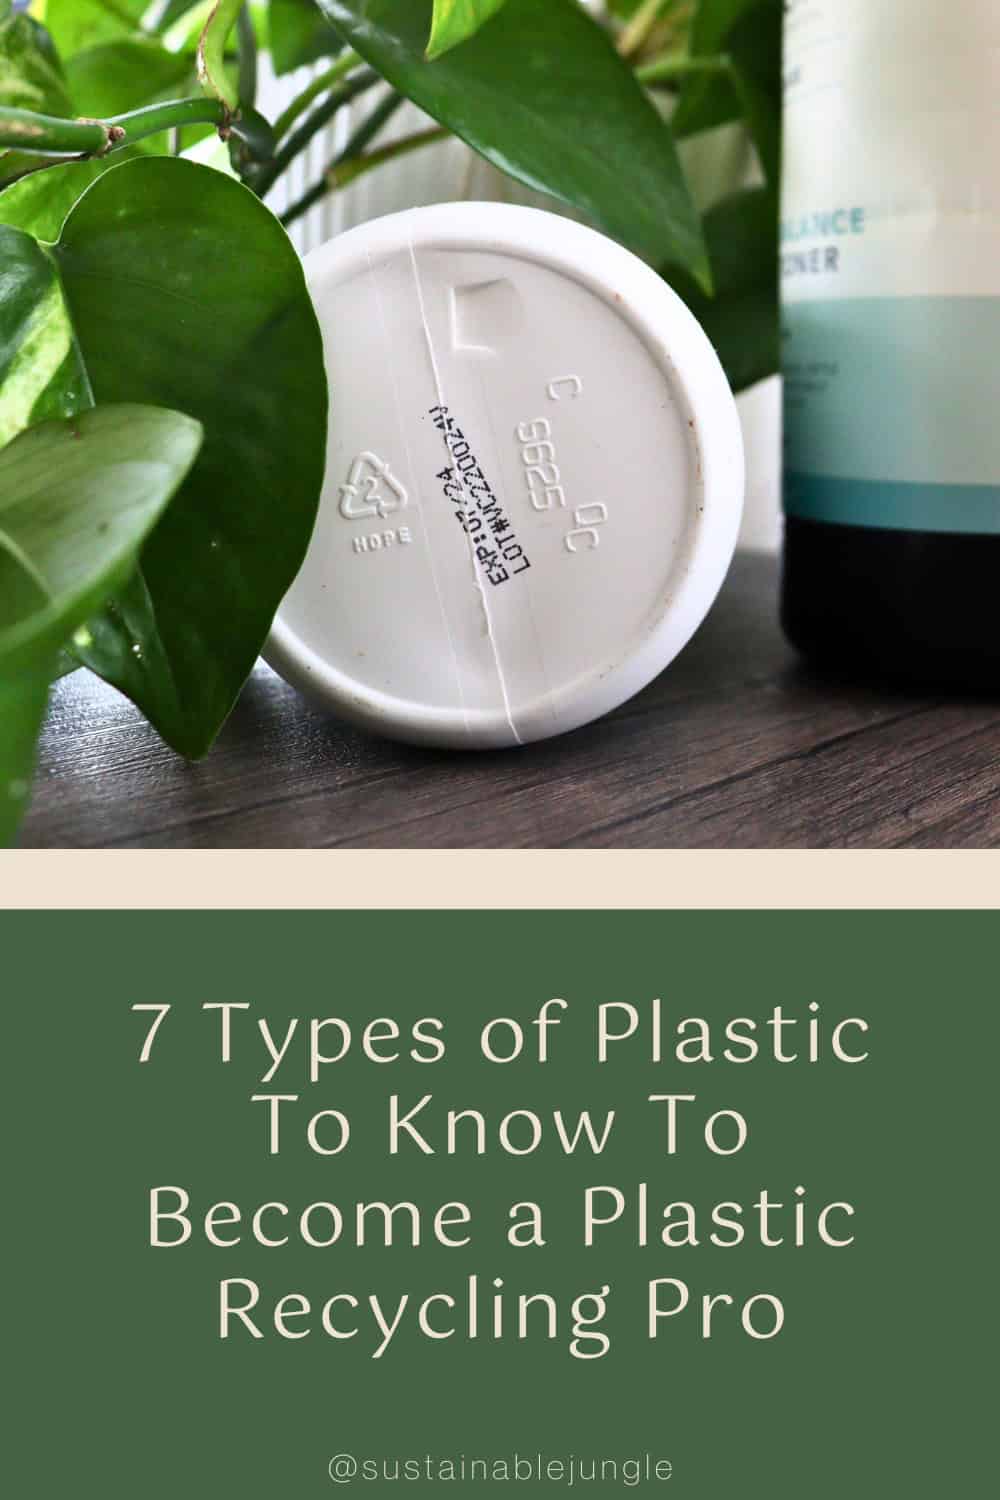 7 Types of Plastic To Know To Become a Plastic Recycling Pro Image by Sustainable Jungle #typesofplastic #7typesofplastic #plastictypes #plasticrecycling #typesofrecyclableplastic #sustainablejungle